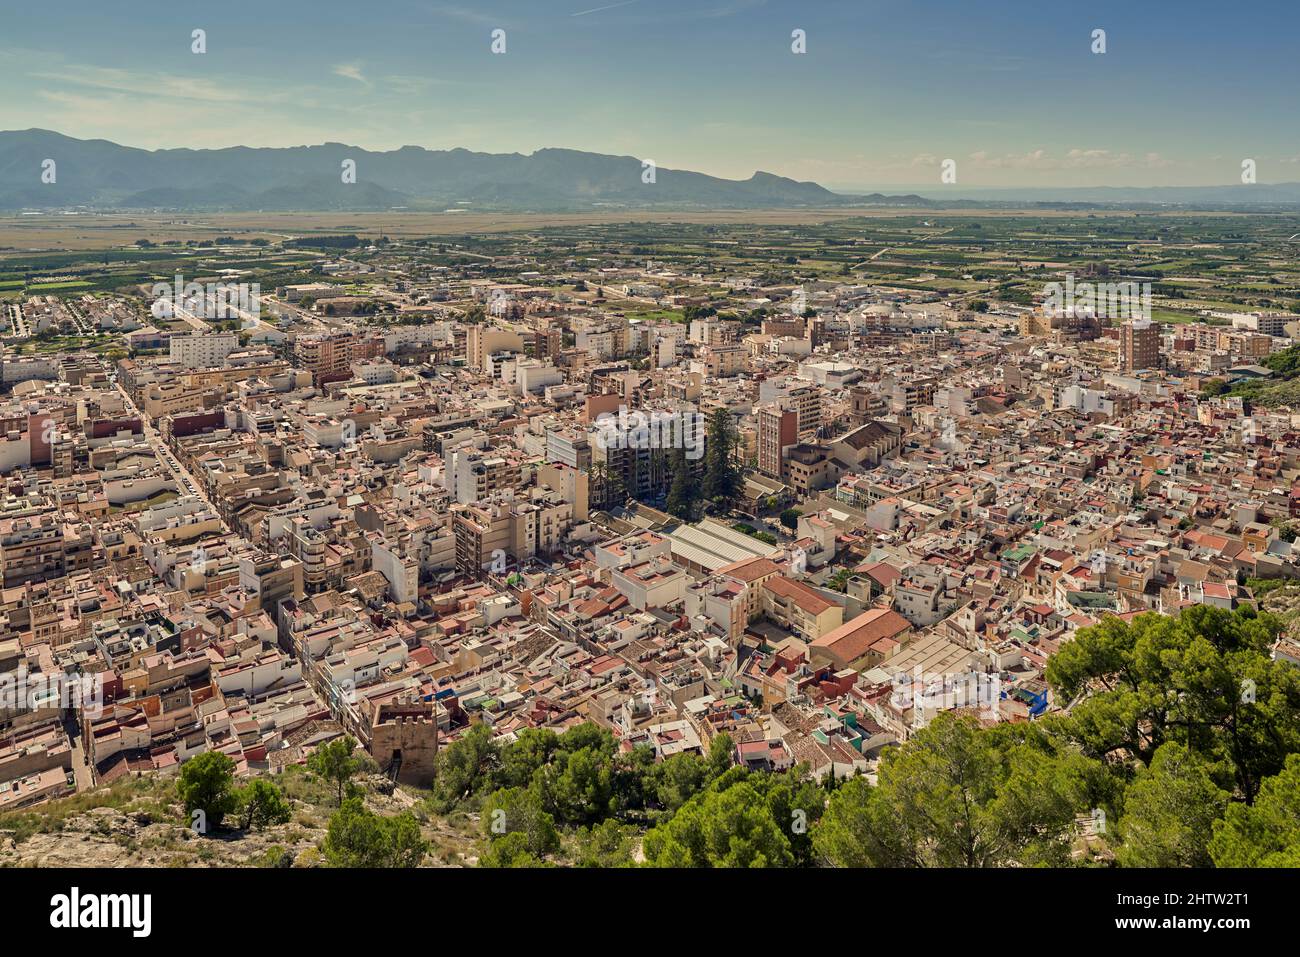 View of the city from the viewpoint of the castle of Cullera on a sunny day in the province of Valencia, Spain, Europe Stock Photo